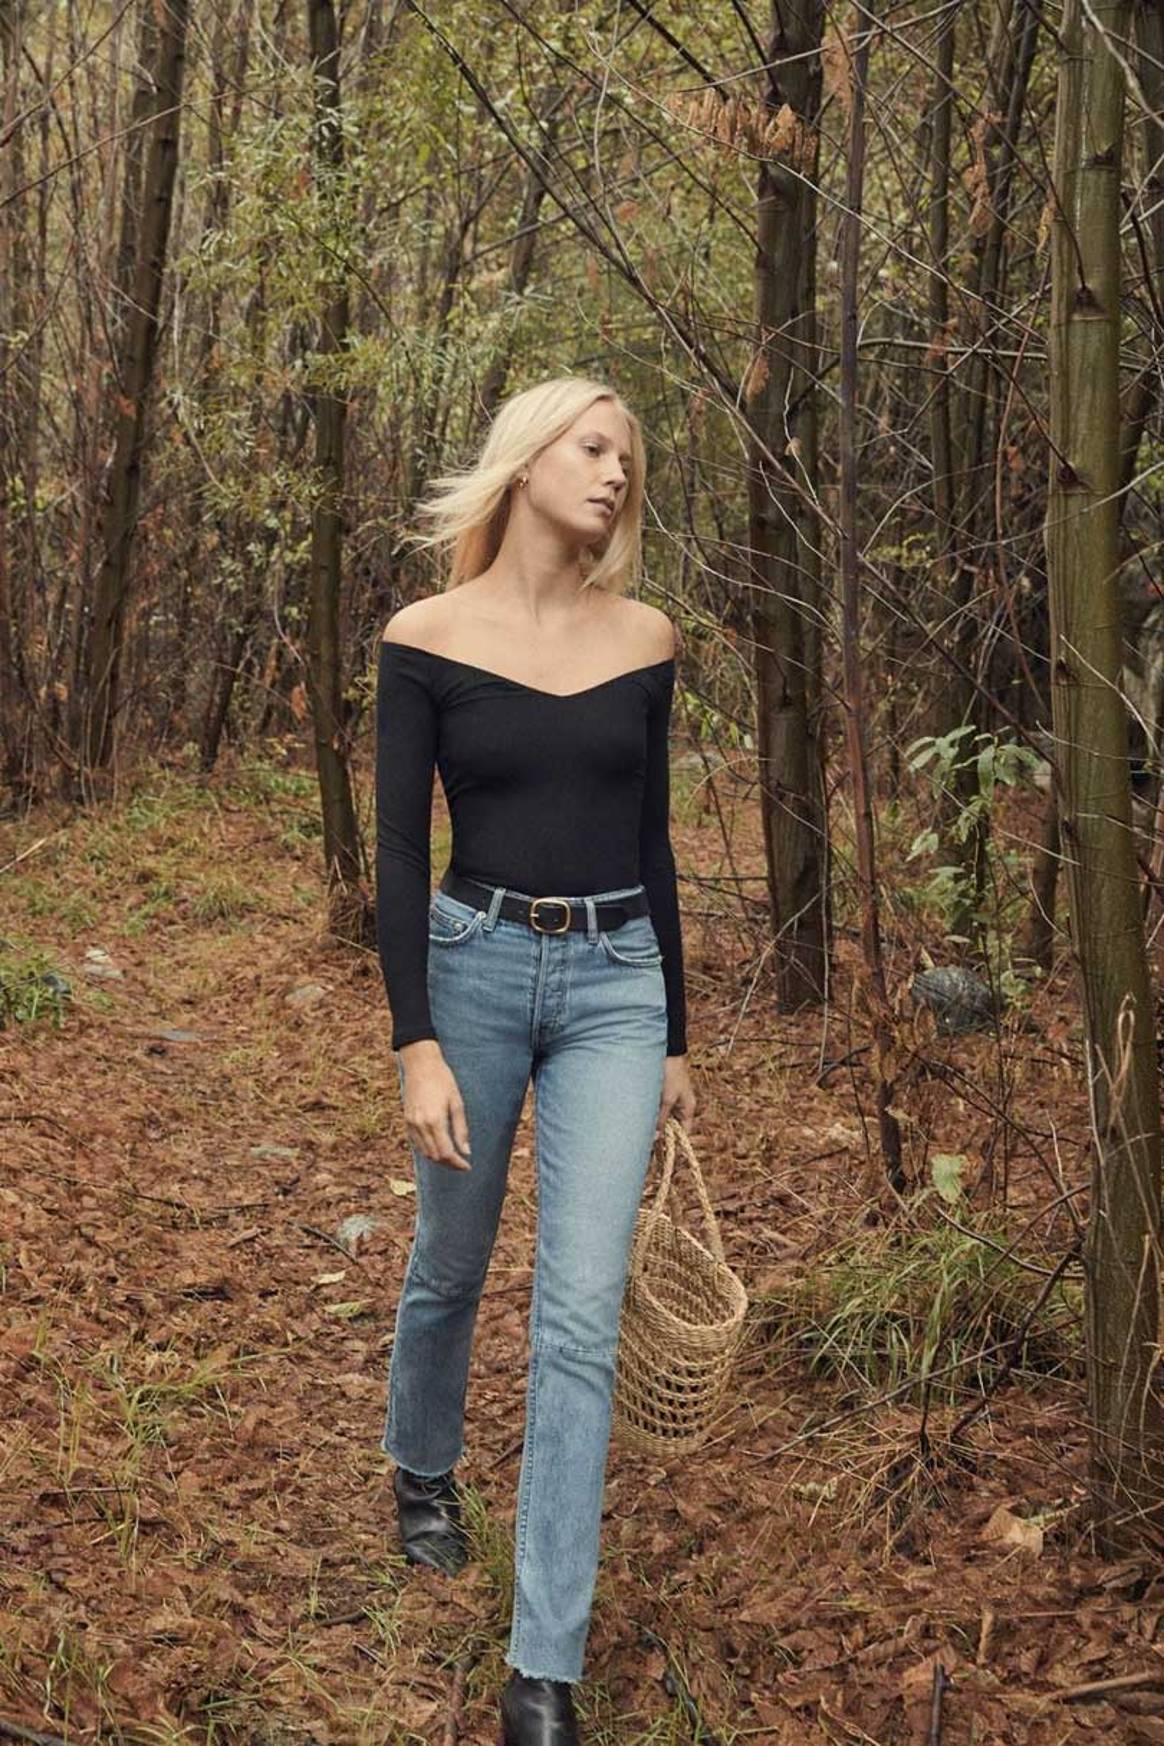 Reformation launches sustainable denim sister label Reformation Jeans